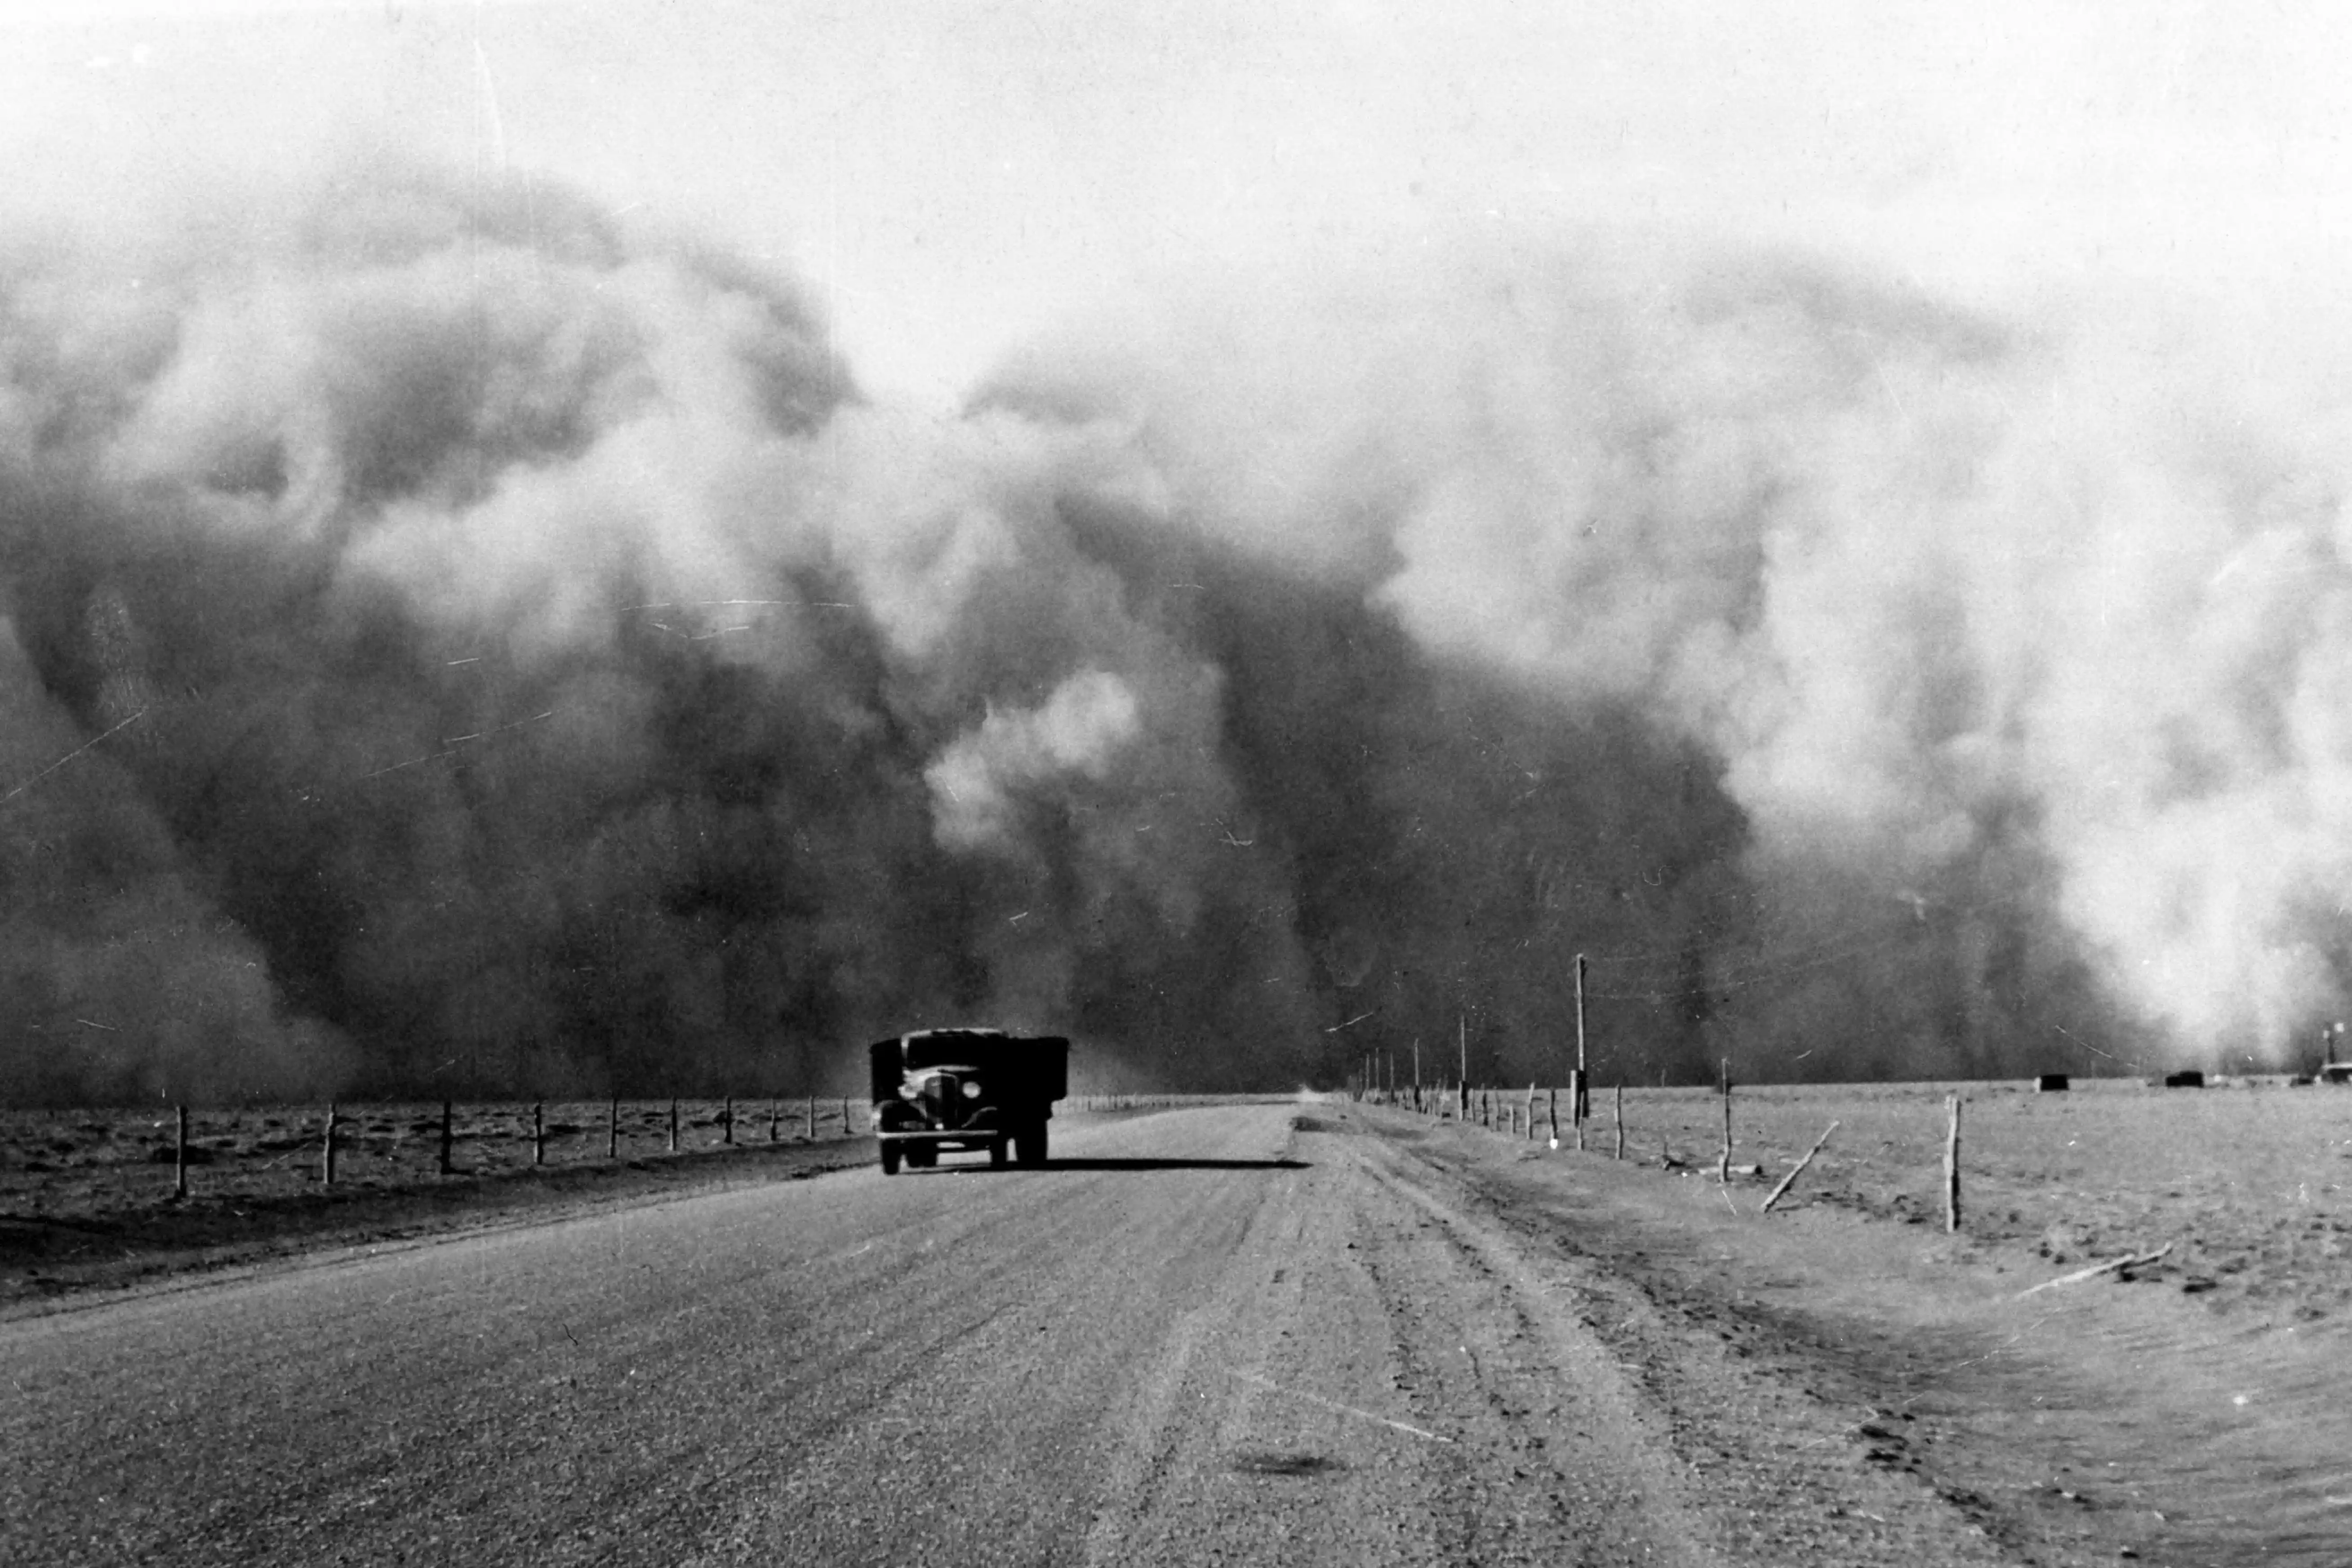 Dust cloud fills the sky and truck drives on dirt road away from it